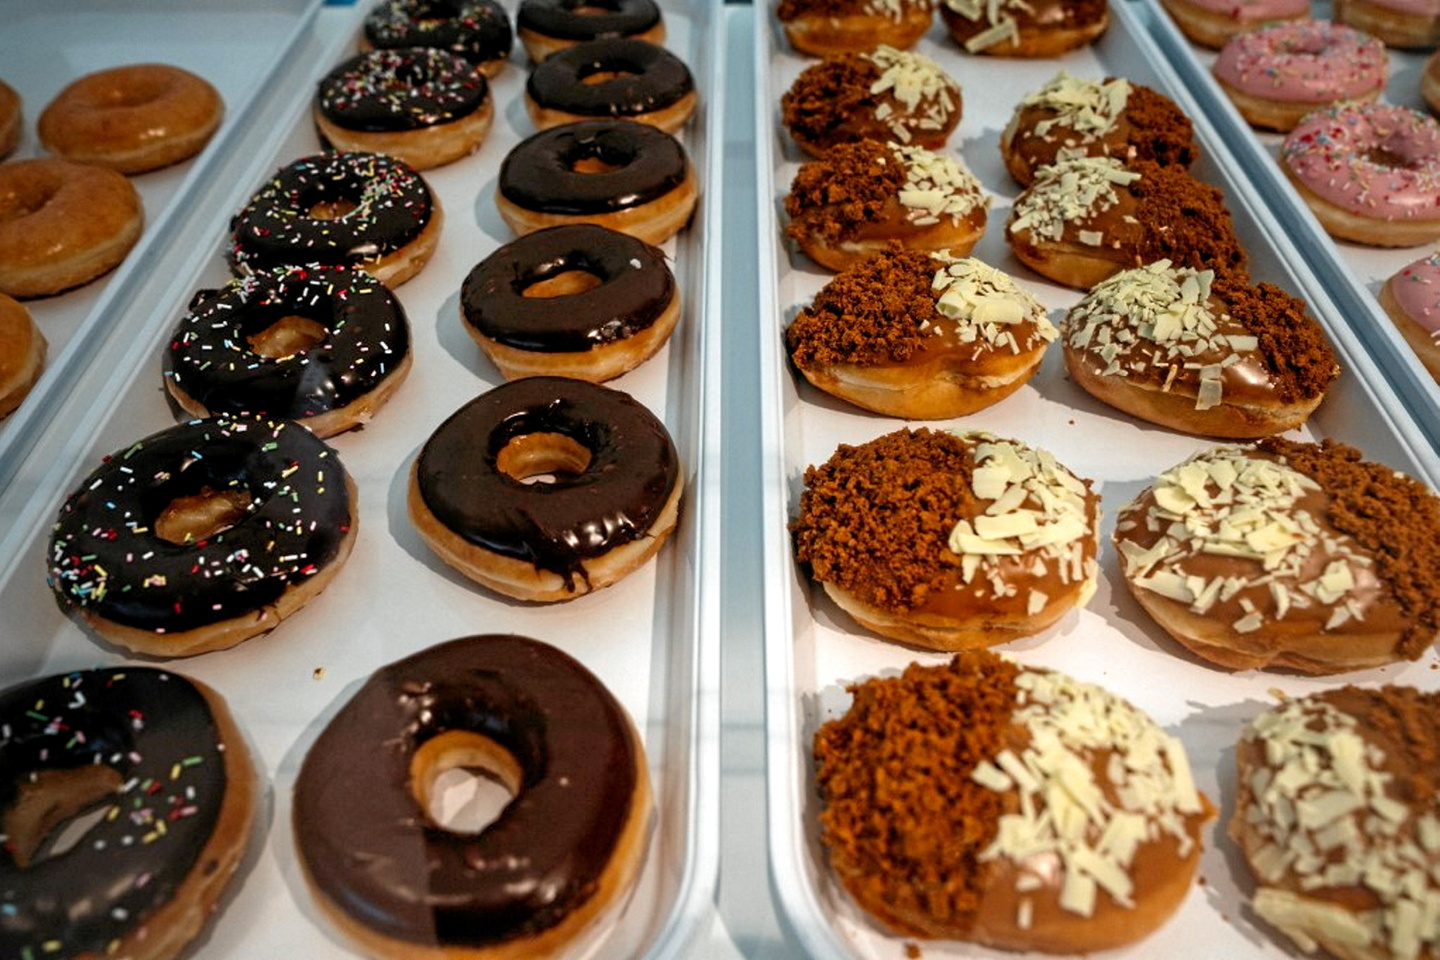 A young woman was arrested with a shipment of 10,000 donuts